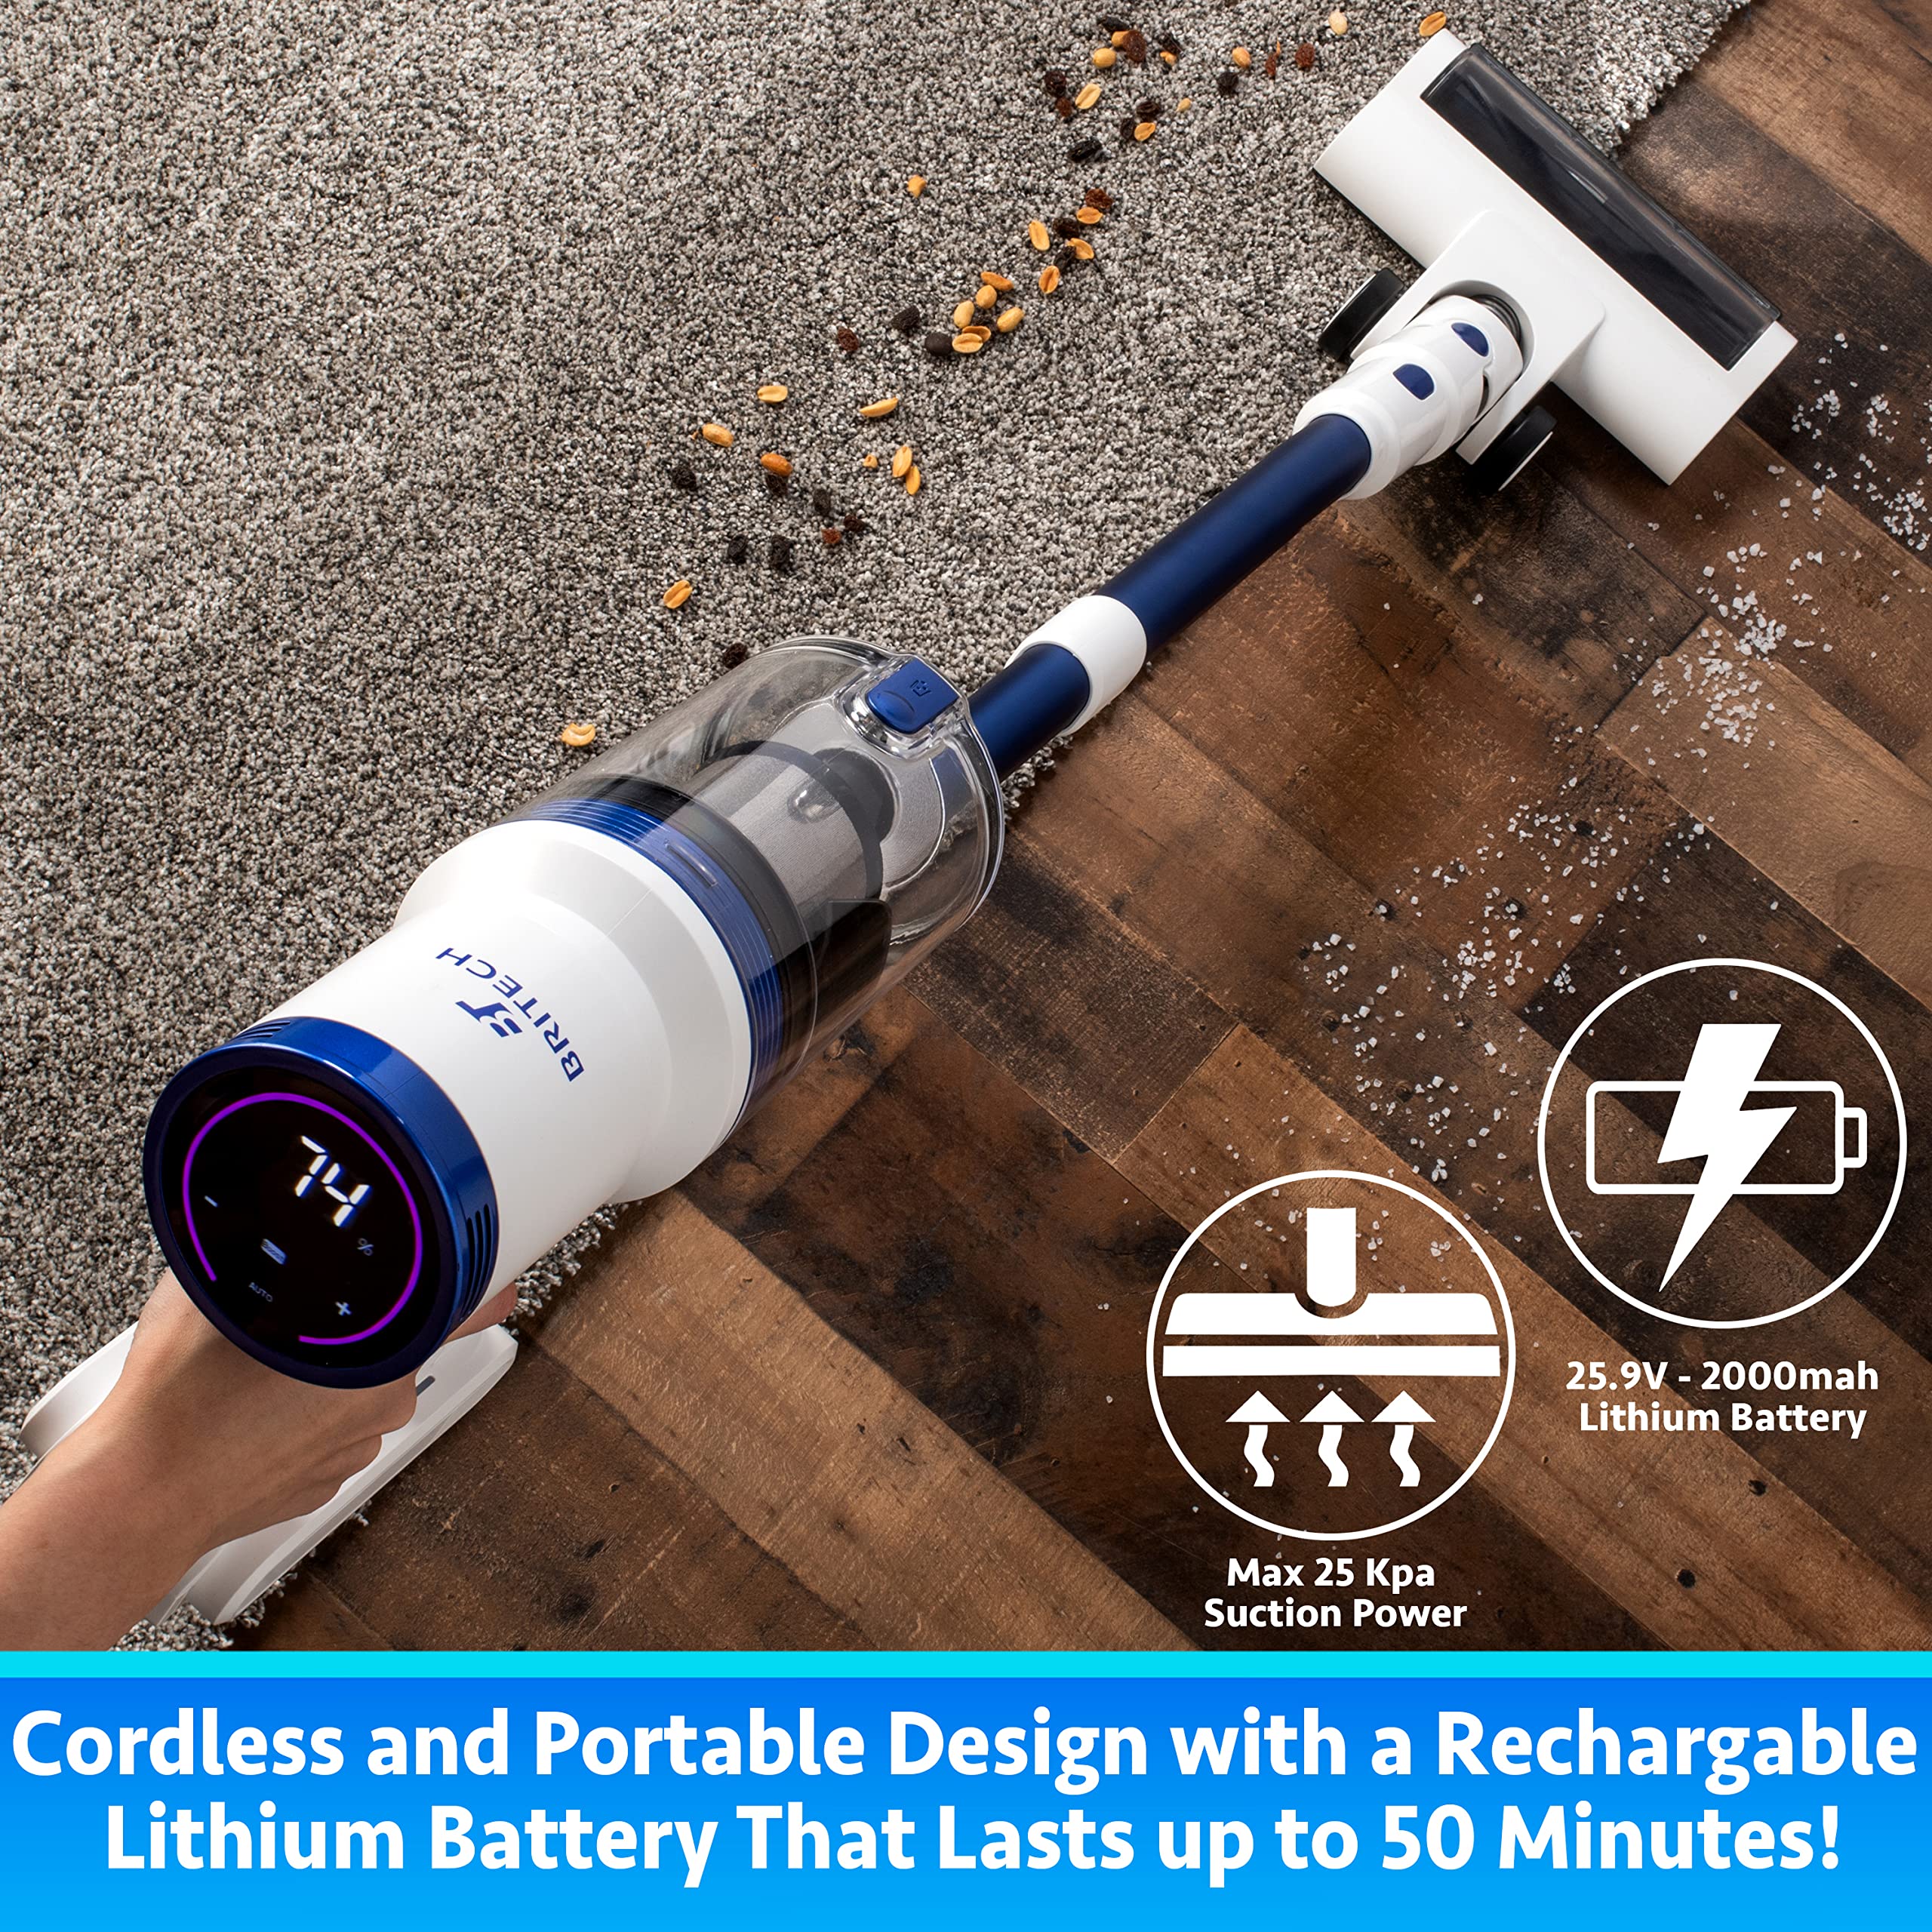 BRITECH Cordless Lightweight Stick Vacuum Cleaner, 300W Motor for Powerful Suction 40min Runtime, LED Display Screen & Headlights, Great for Carpet Cleaner, Hardwood Floor & Pet Hair (Blue)  - Acceptable